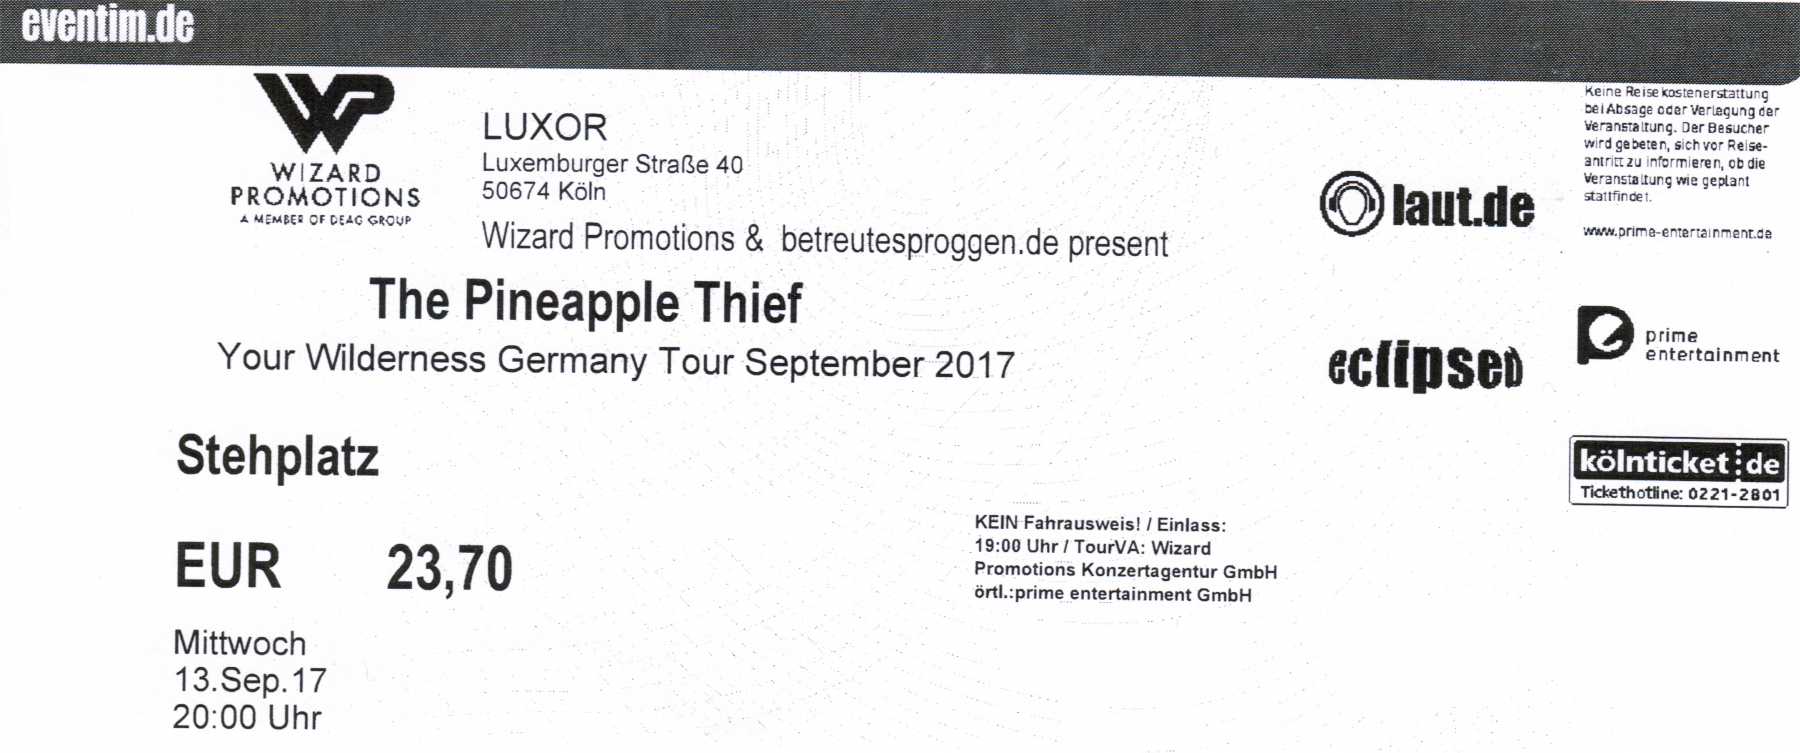 20170913_The_Pineapple_Thief